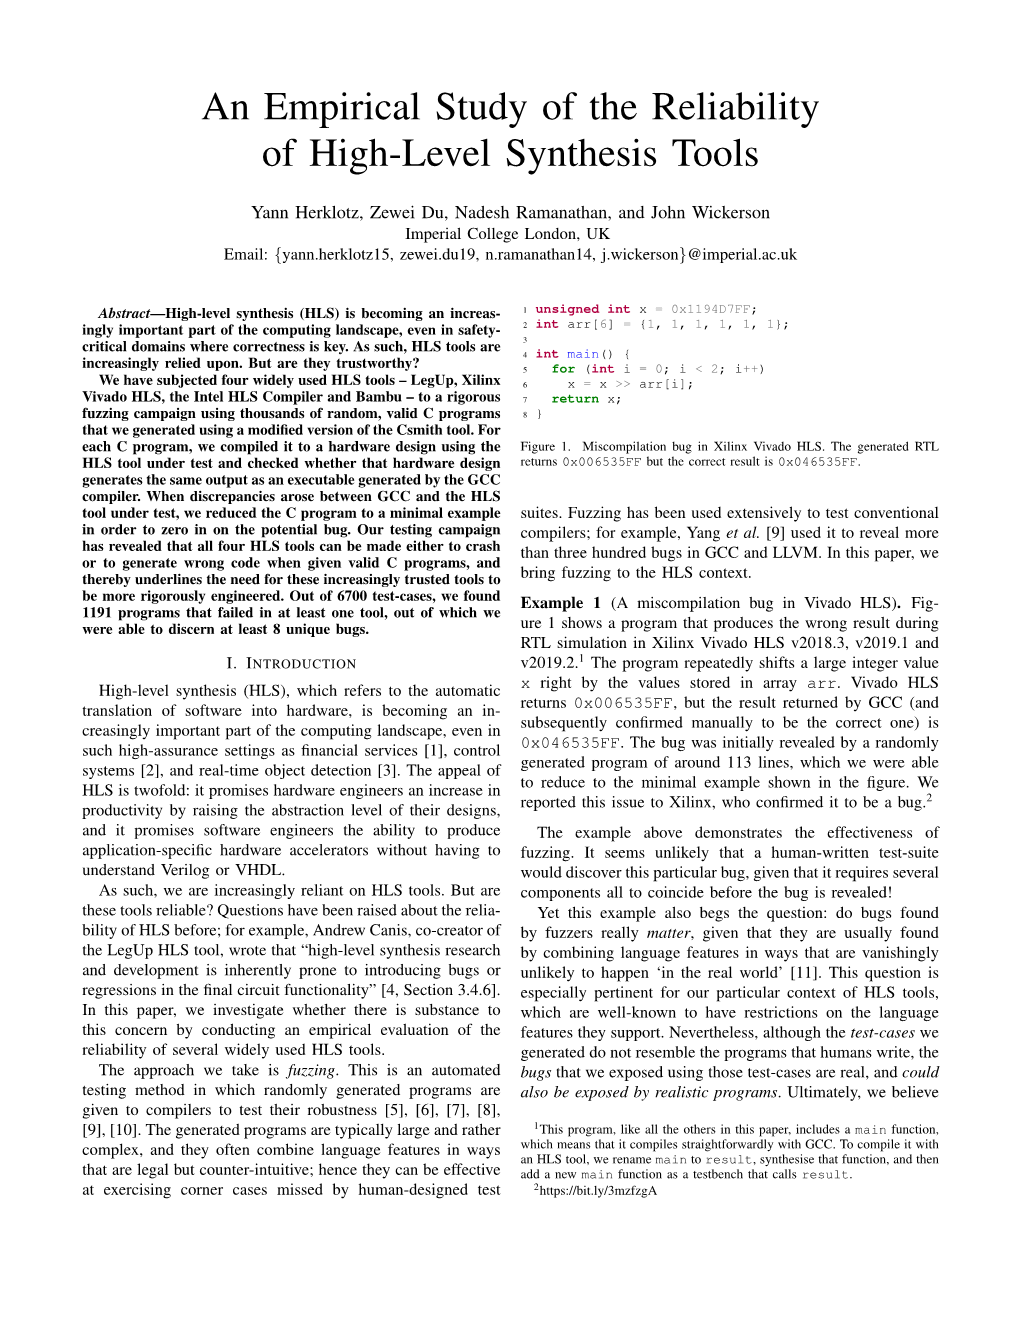 An Empirical Study of the Reliability of High-Level Synthesis Tools